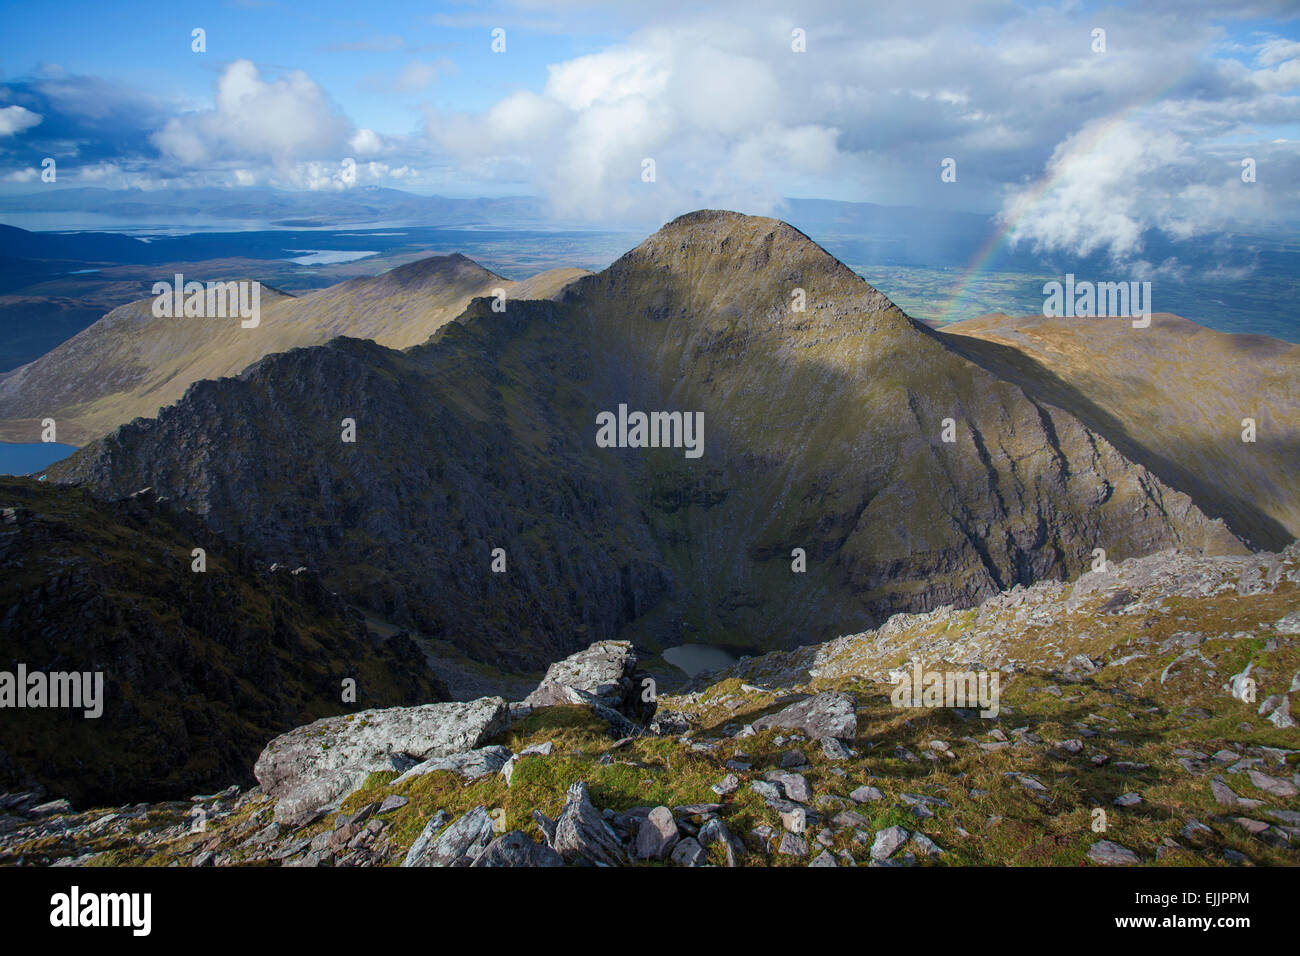 Beenkeragh, Ireland's second highest mountain, seen from the summit of Carrauntoohil, MacGillycuddy's Reeks, County Kerry, Ireland. Stock Photo